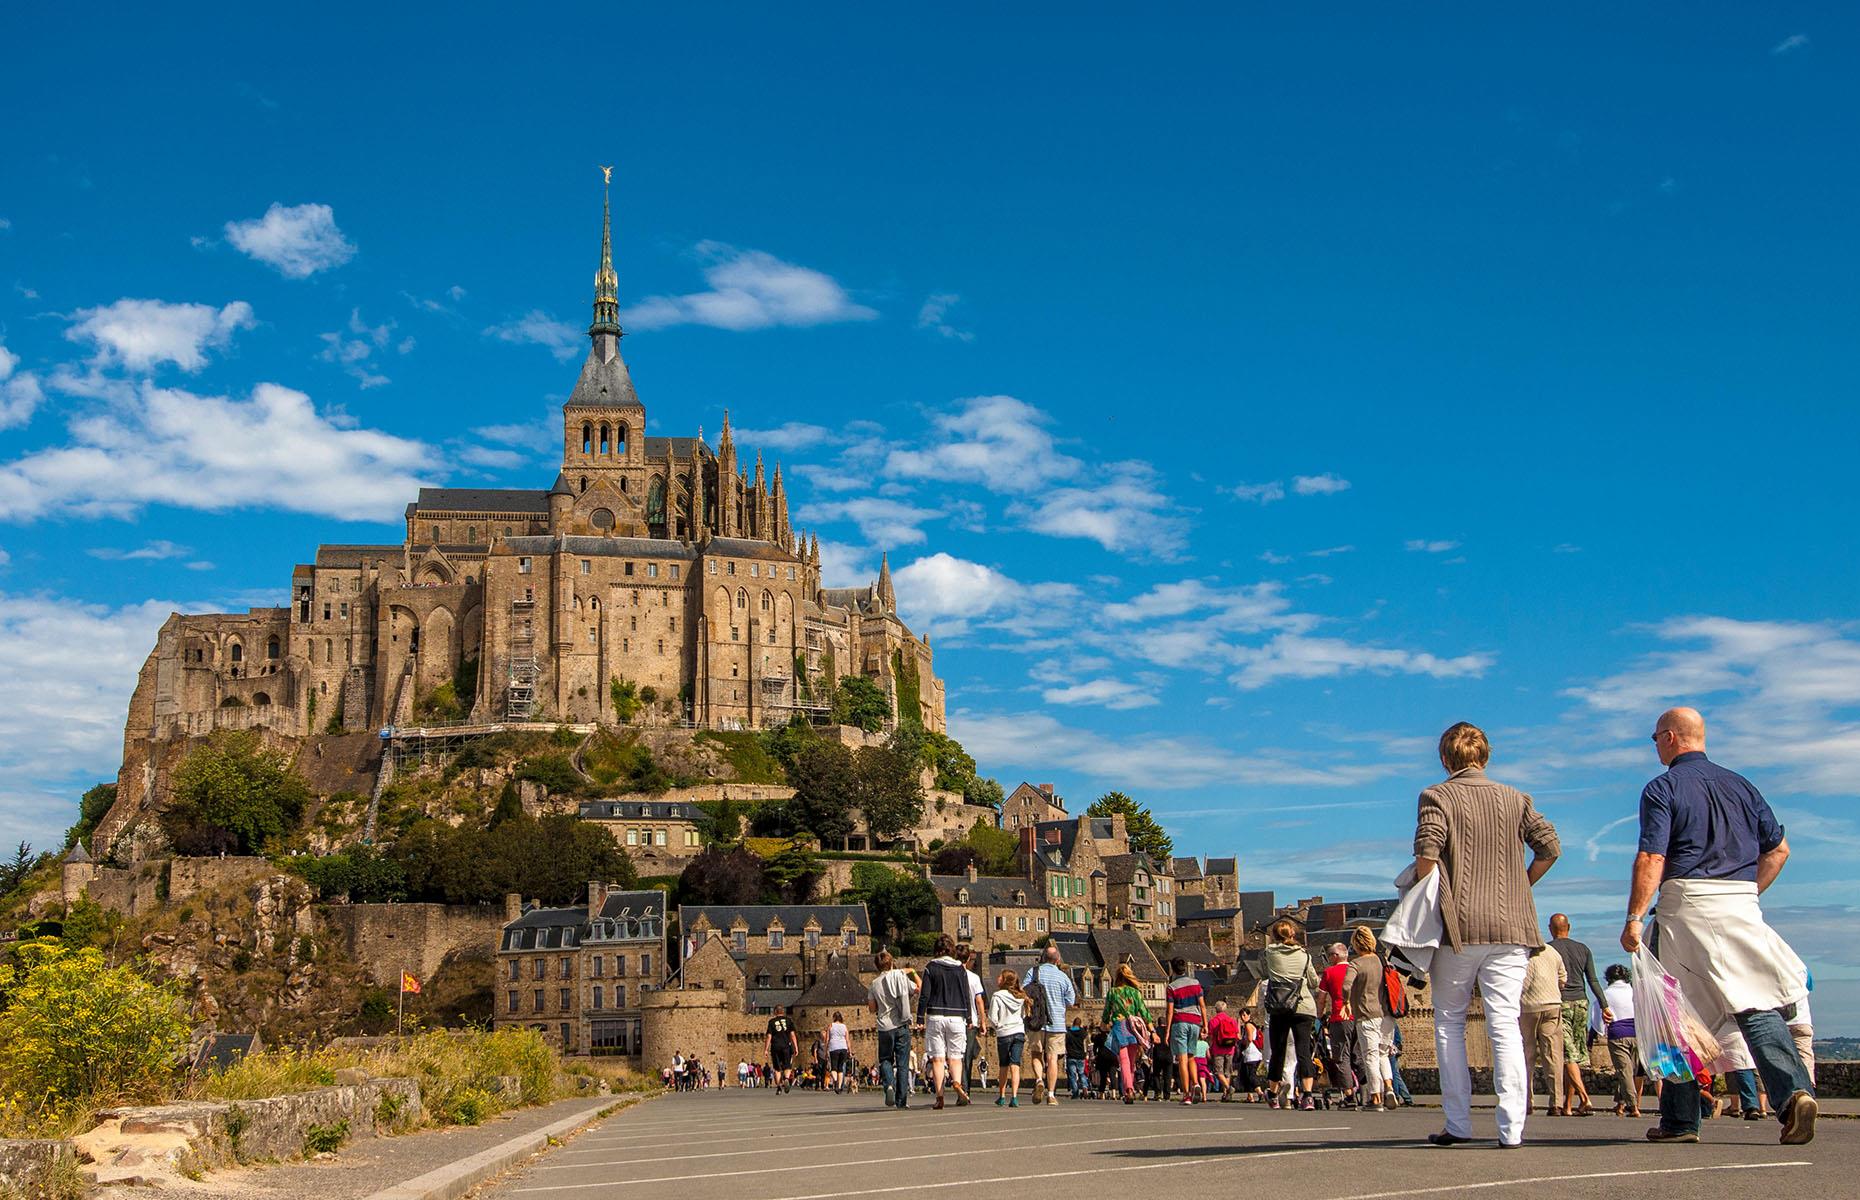 <p>In an unusual twist to deter visitor numbers to one of its top attractions, local authorities in Normandy, France have posted images of endless queues (like the one pictured) to stop more tourists from coming. Mont St Michel, a famous 10th-century abbey, has attracted 60,000 visitors in one weekend (late May 2023), forcing those in charge to declare that the site could no longer handle peak-time crowds.</p>